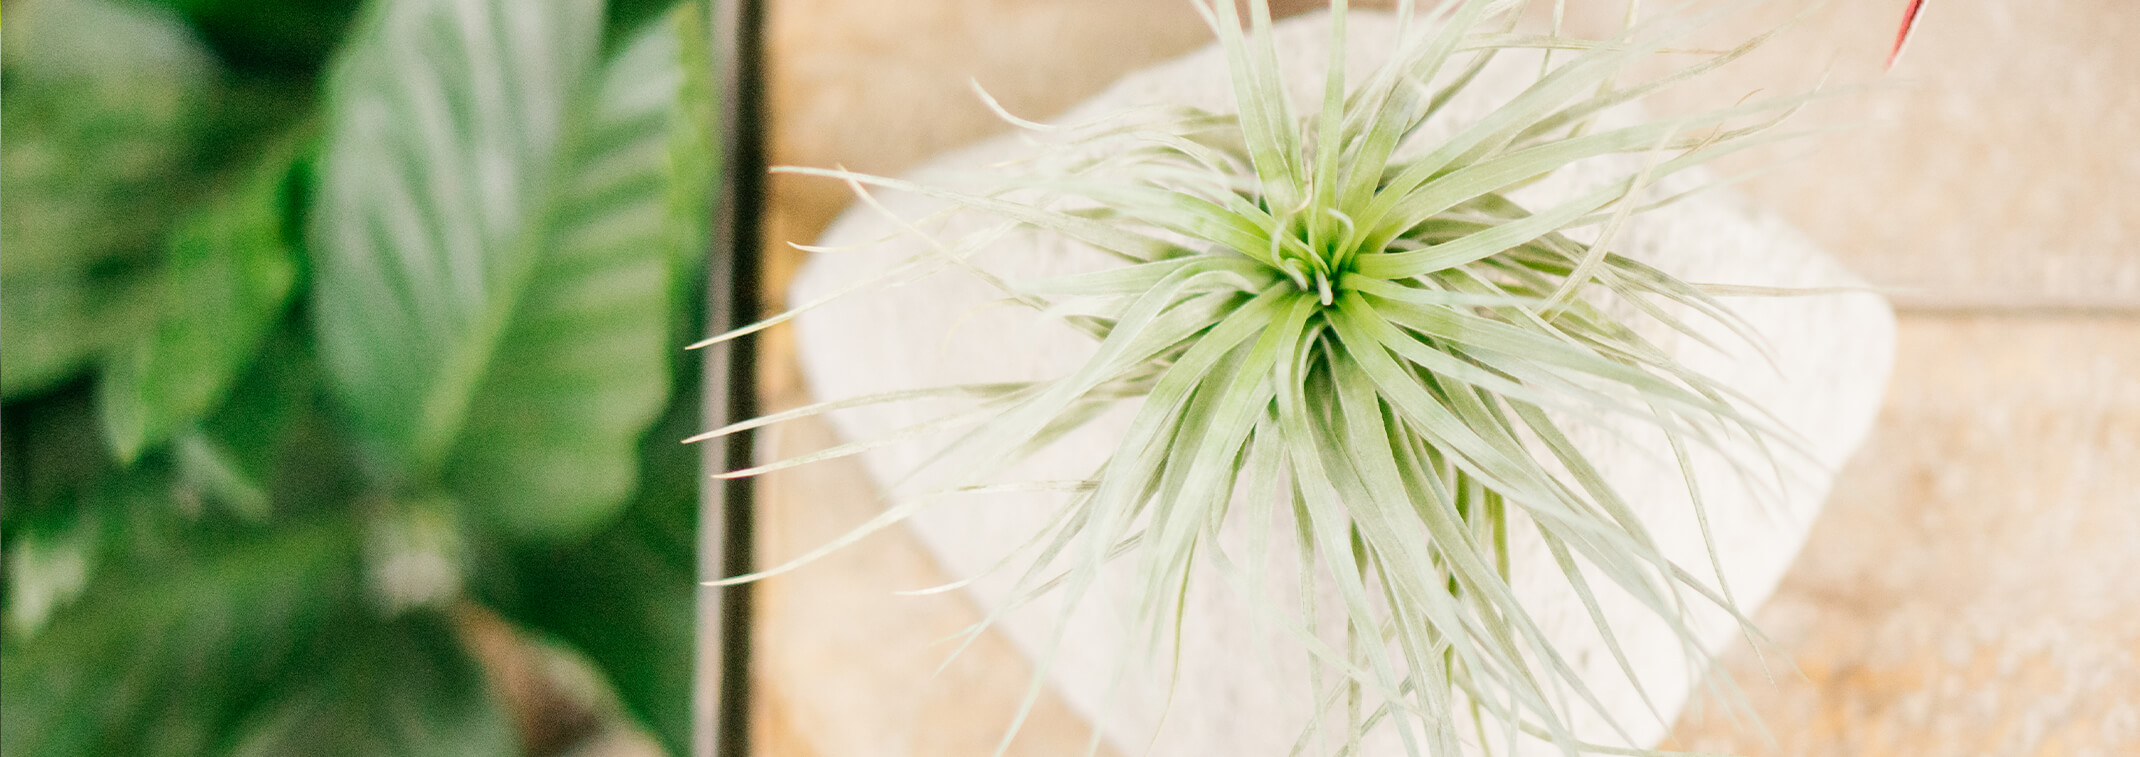 A closeup of an airplant in a stone planter on a wooden table with houseplants blurred in the background on the left